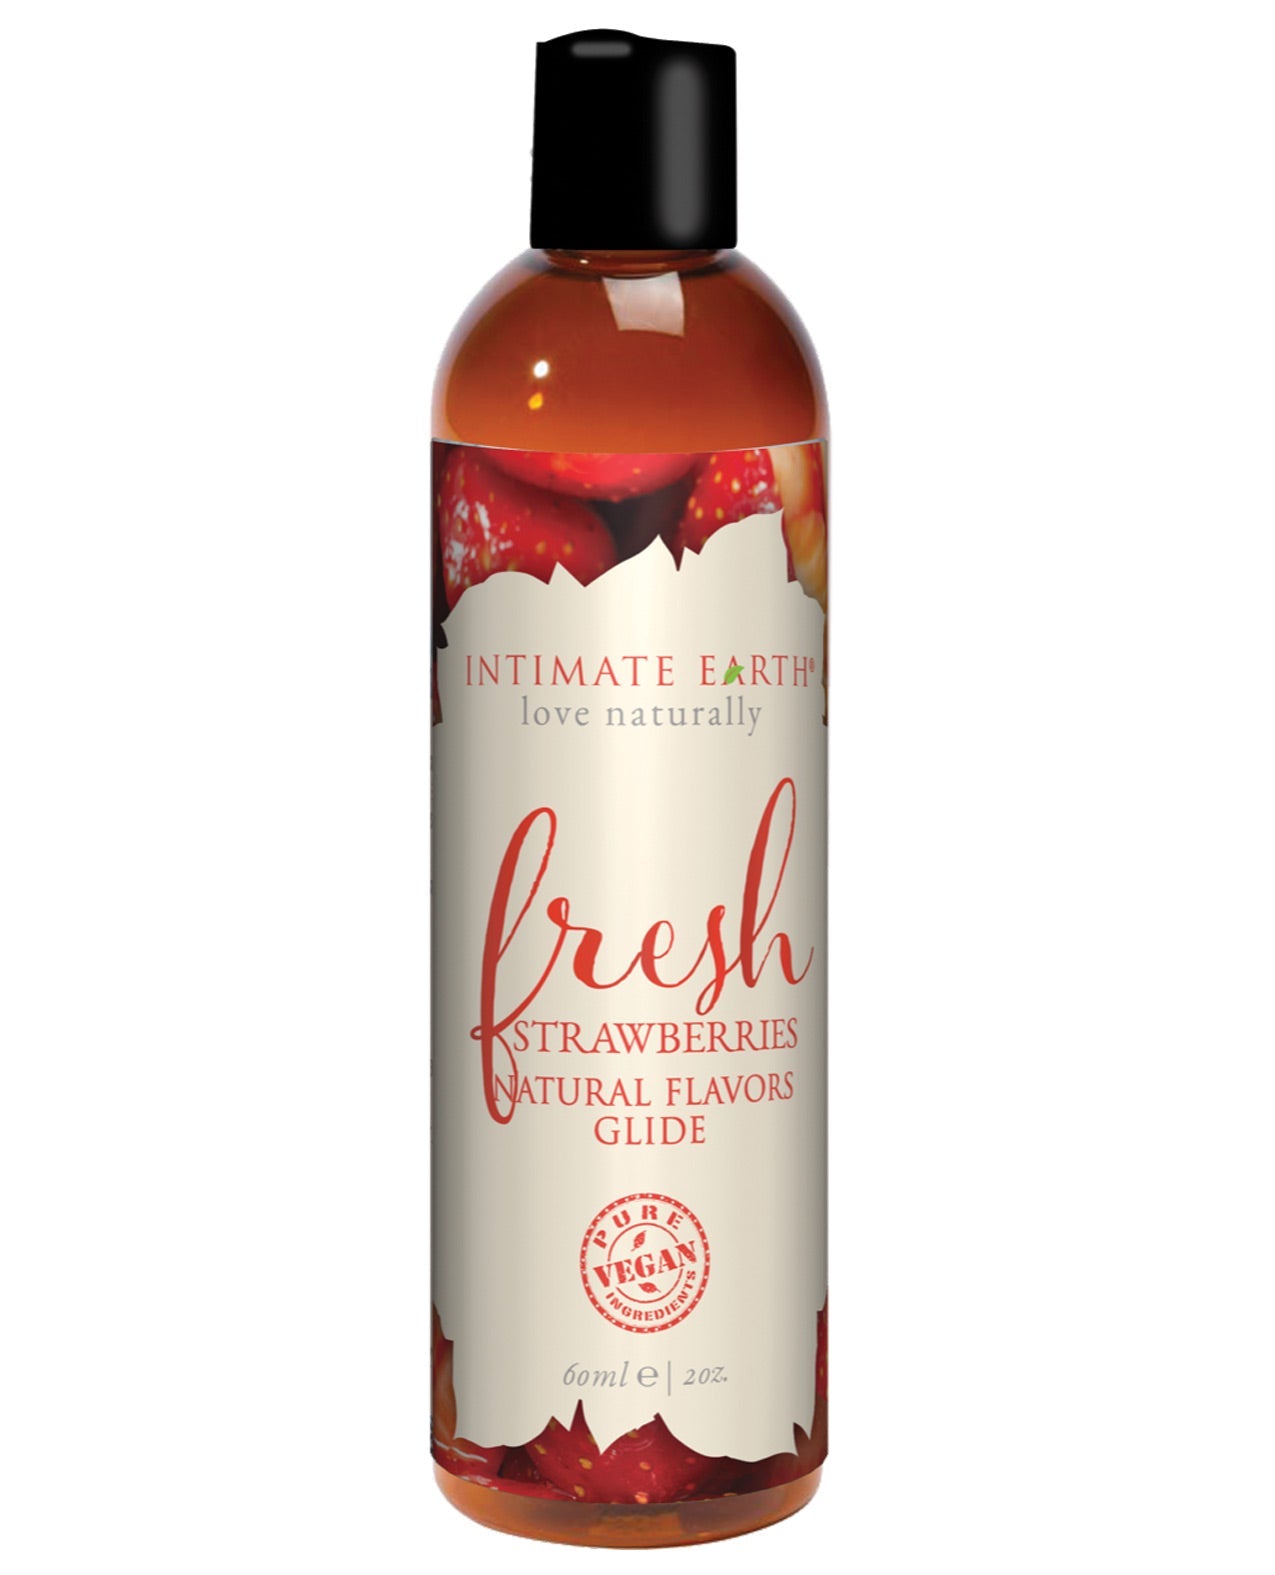 Intimate Earth Natural Flavors Glide – 60 ml Fresh Strawberries